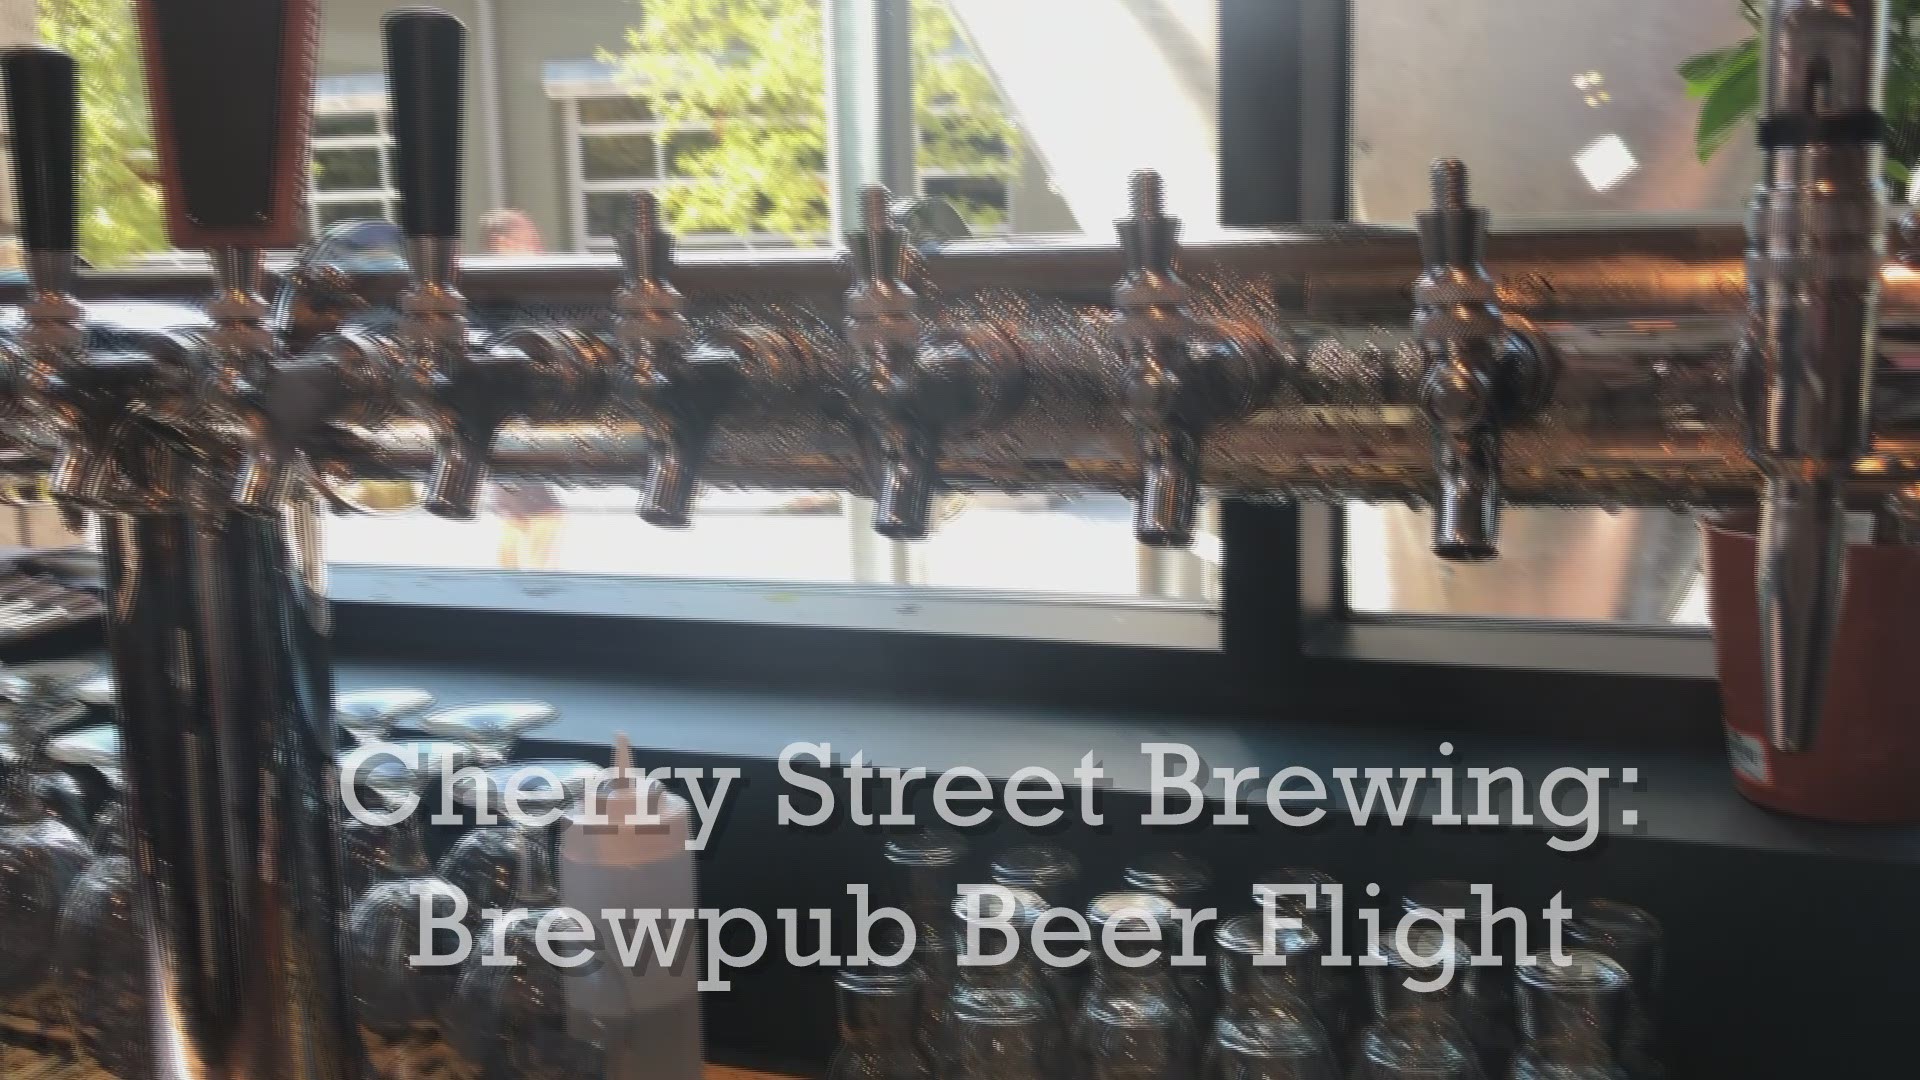 Video of Cherry Street Brewing and their beer flight.